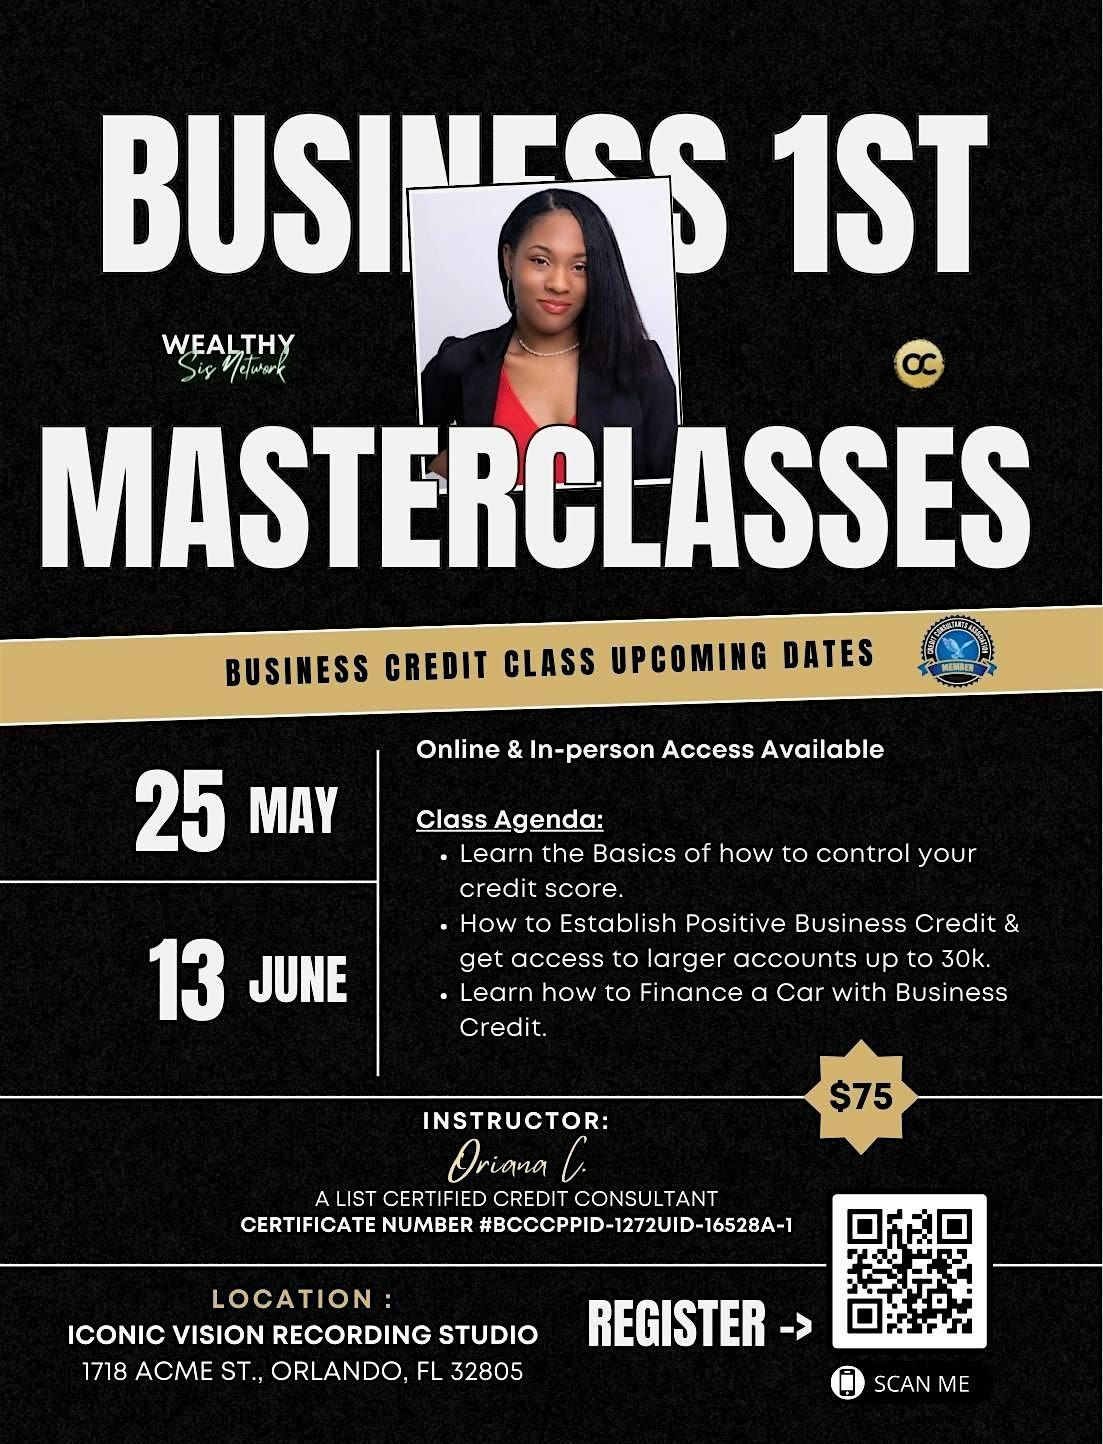 Business Startup Class - Credit Building